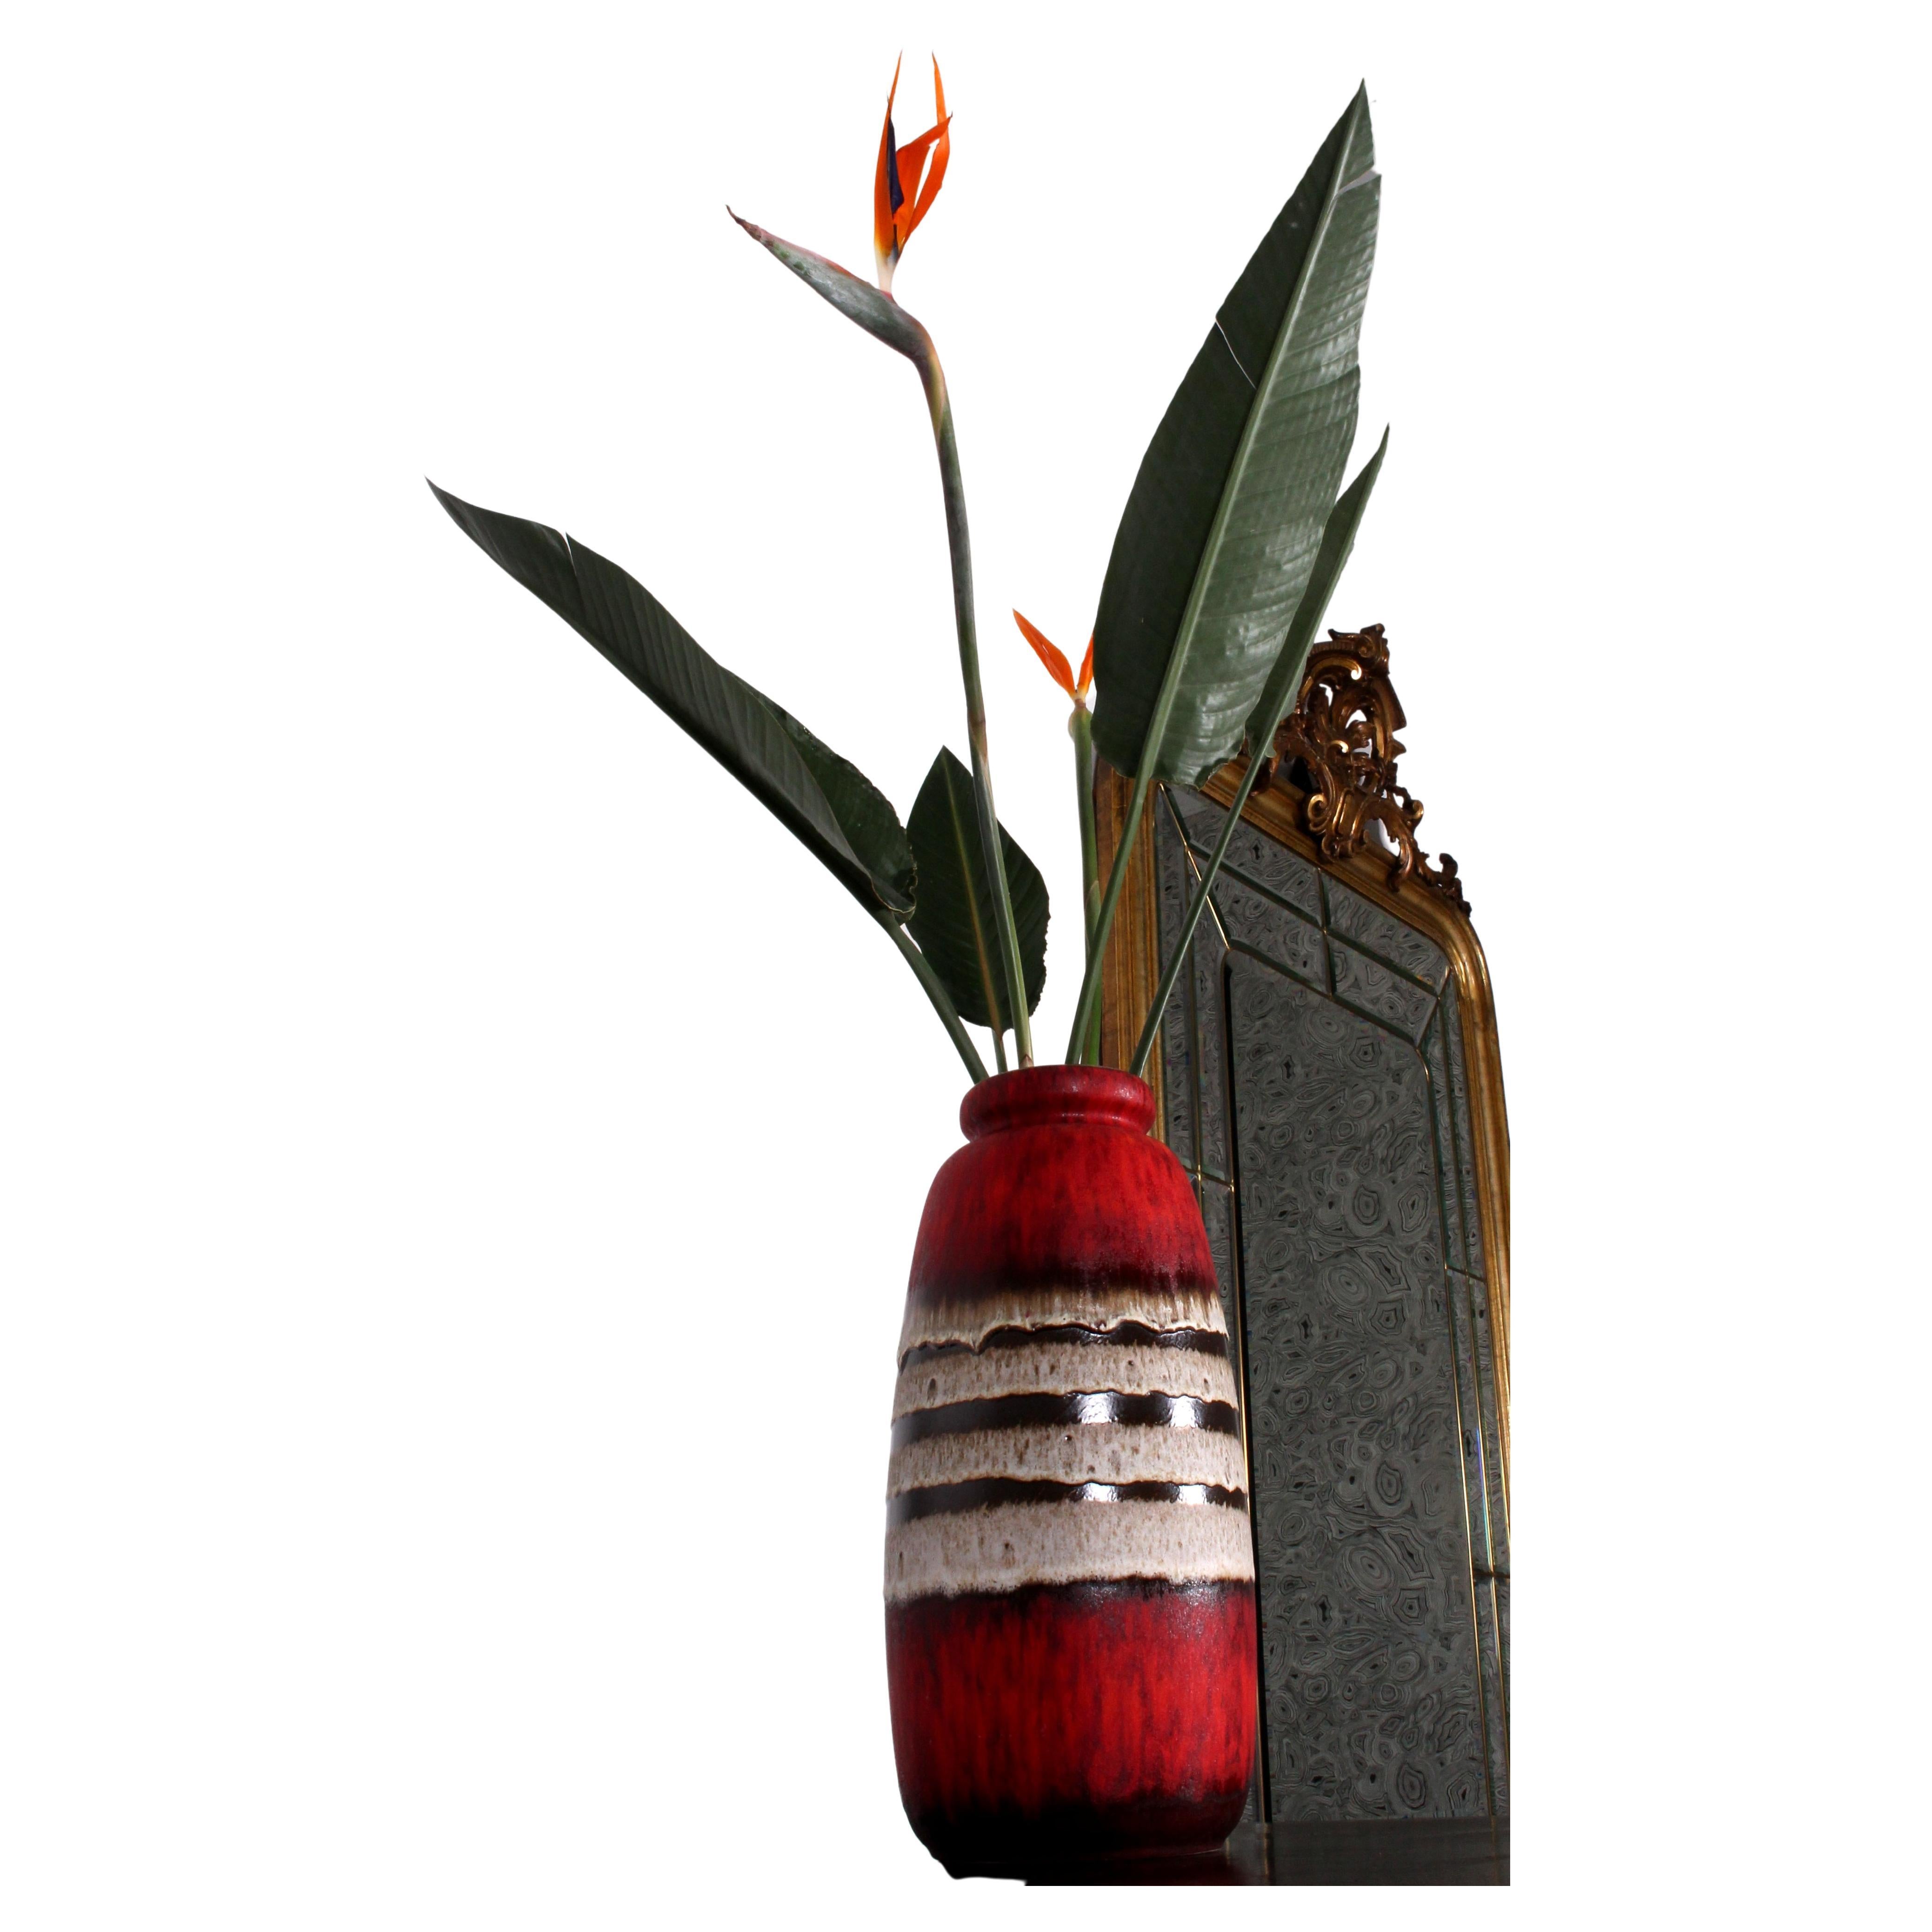 a striking RED FAT LAVA FLOOR VASE no. 284-47
by SCHEURICH

SCHEURICH had its origins in a joint venture launched in 1928 by Alois Scheurich and his cousin Fridolin Greulich in the small town of Schneeberg near the Czech border in Saxony—wholesaling